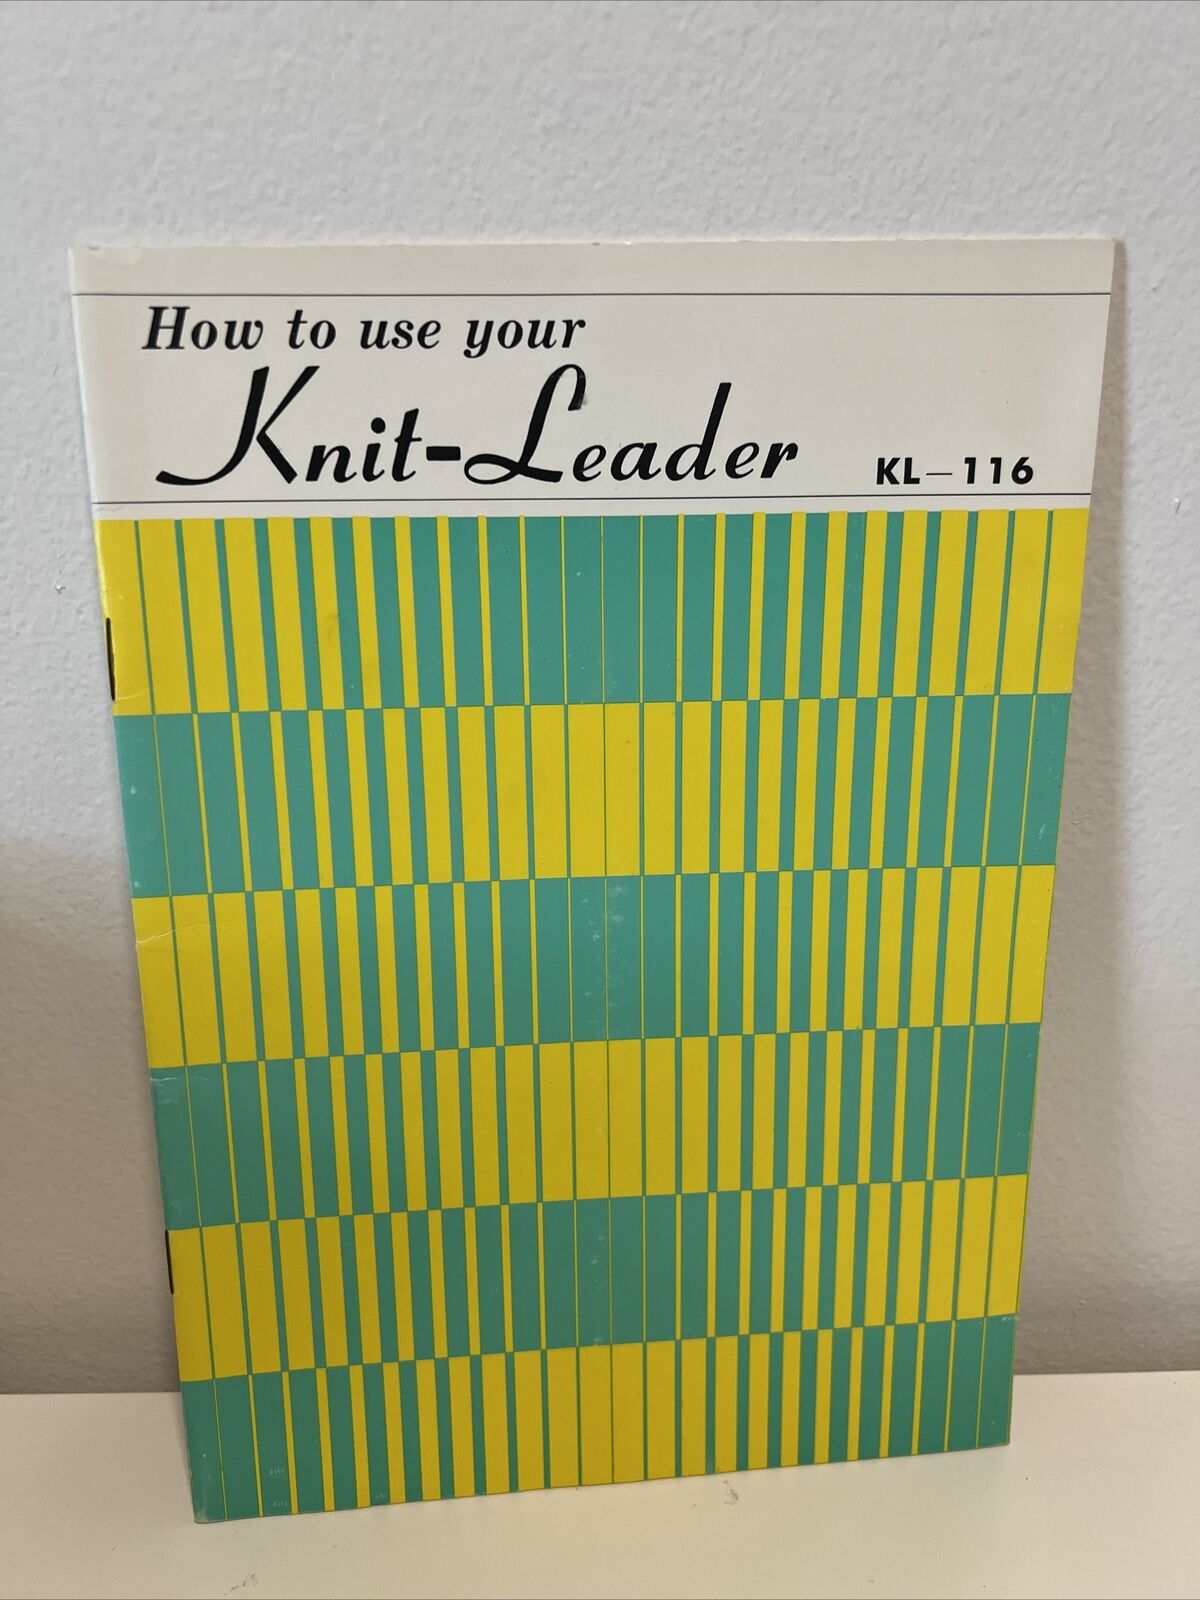 How To Use Your Knit - Leader Knitting Machine Manual Kl-116 24 Pages Japan